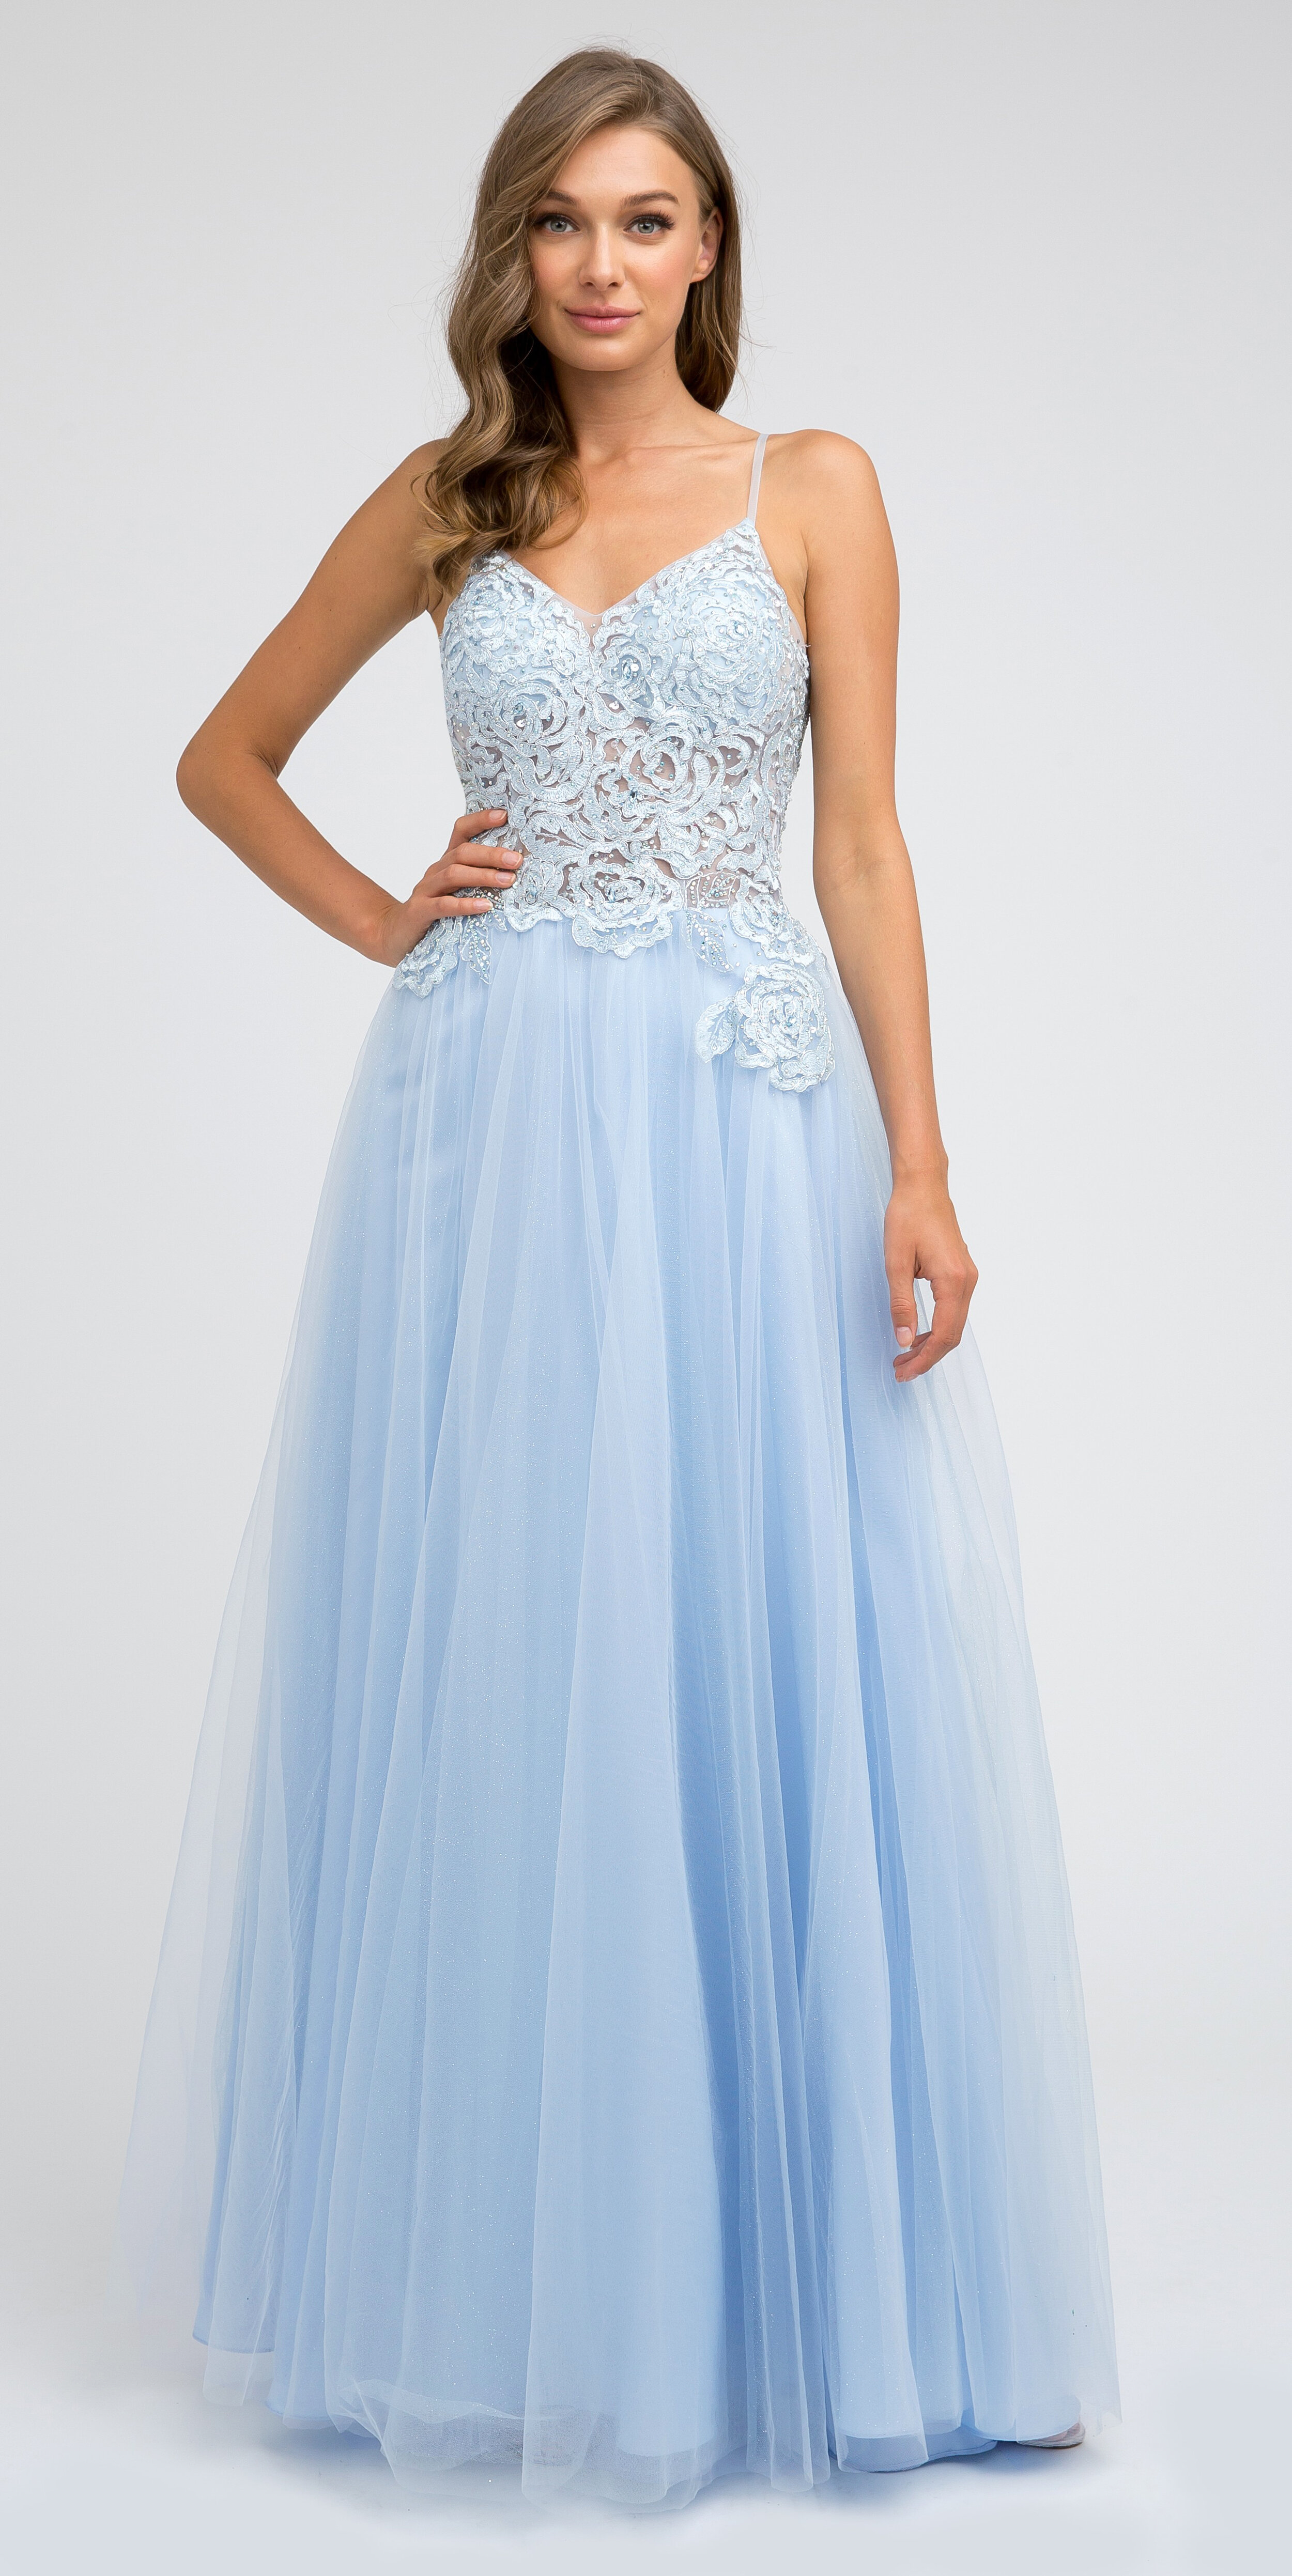 ice blue evening gown Big sale - OFF 66%